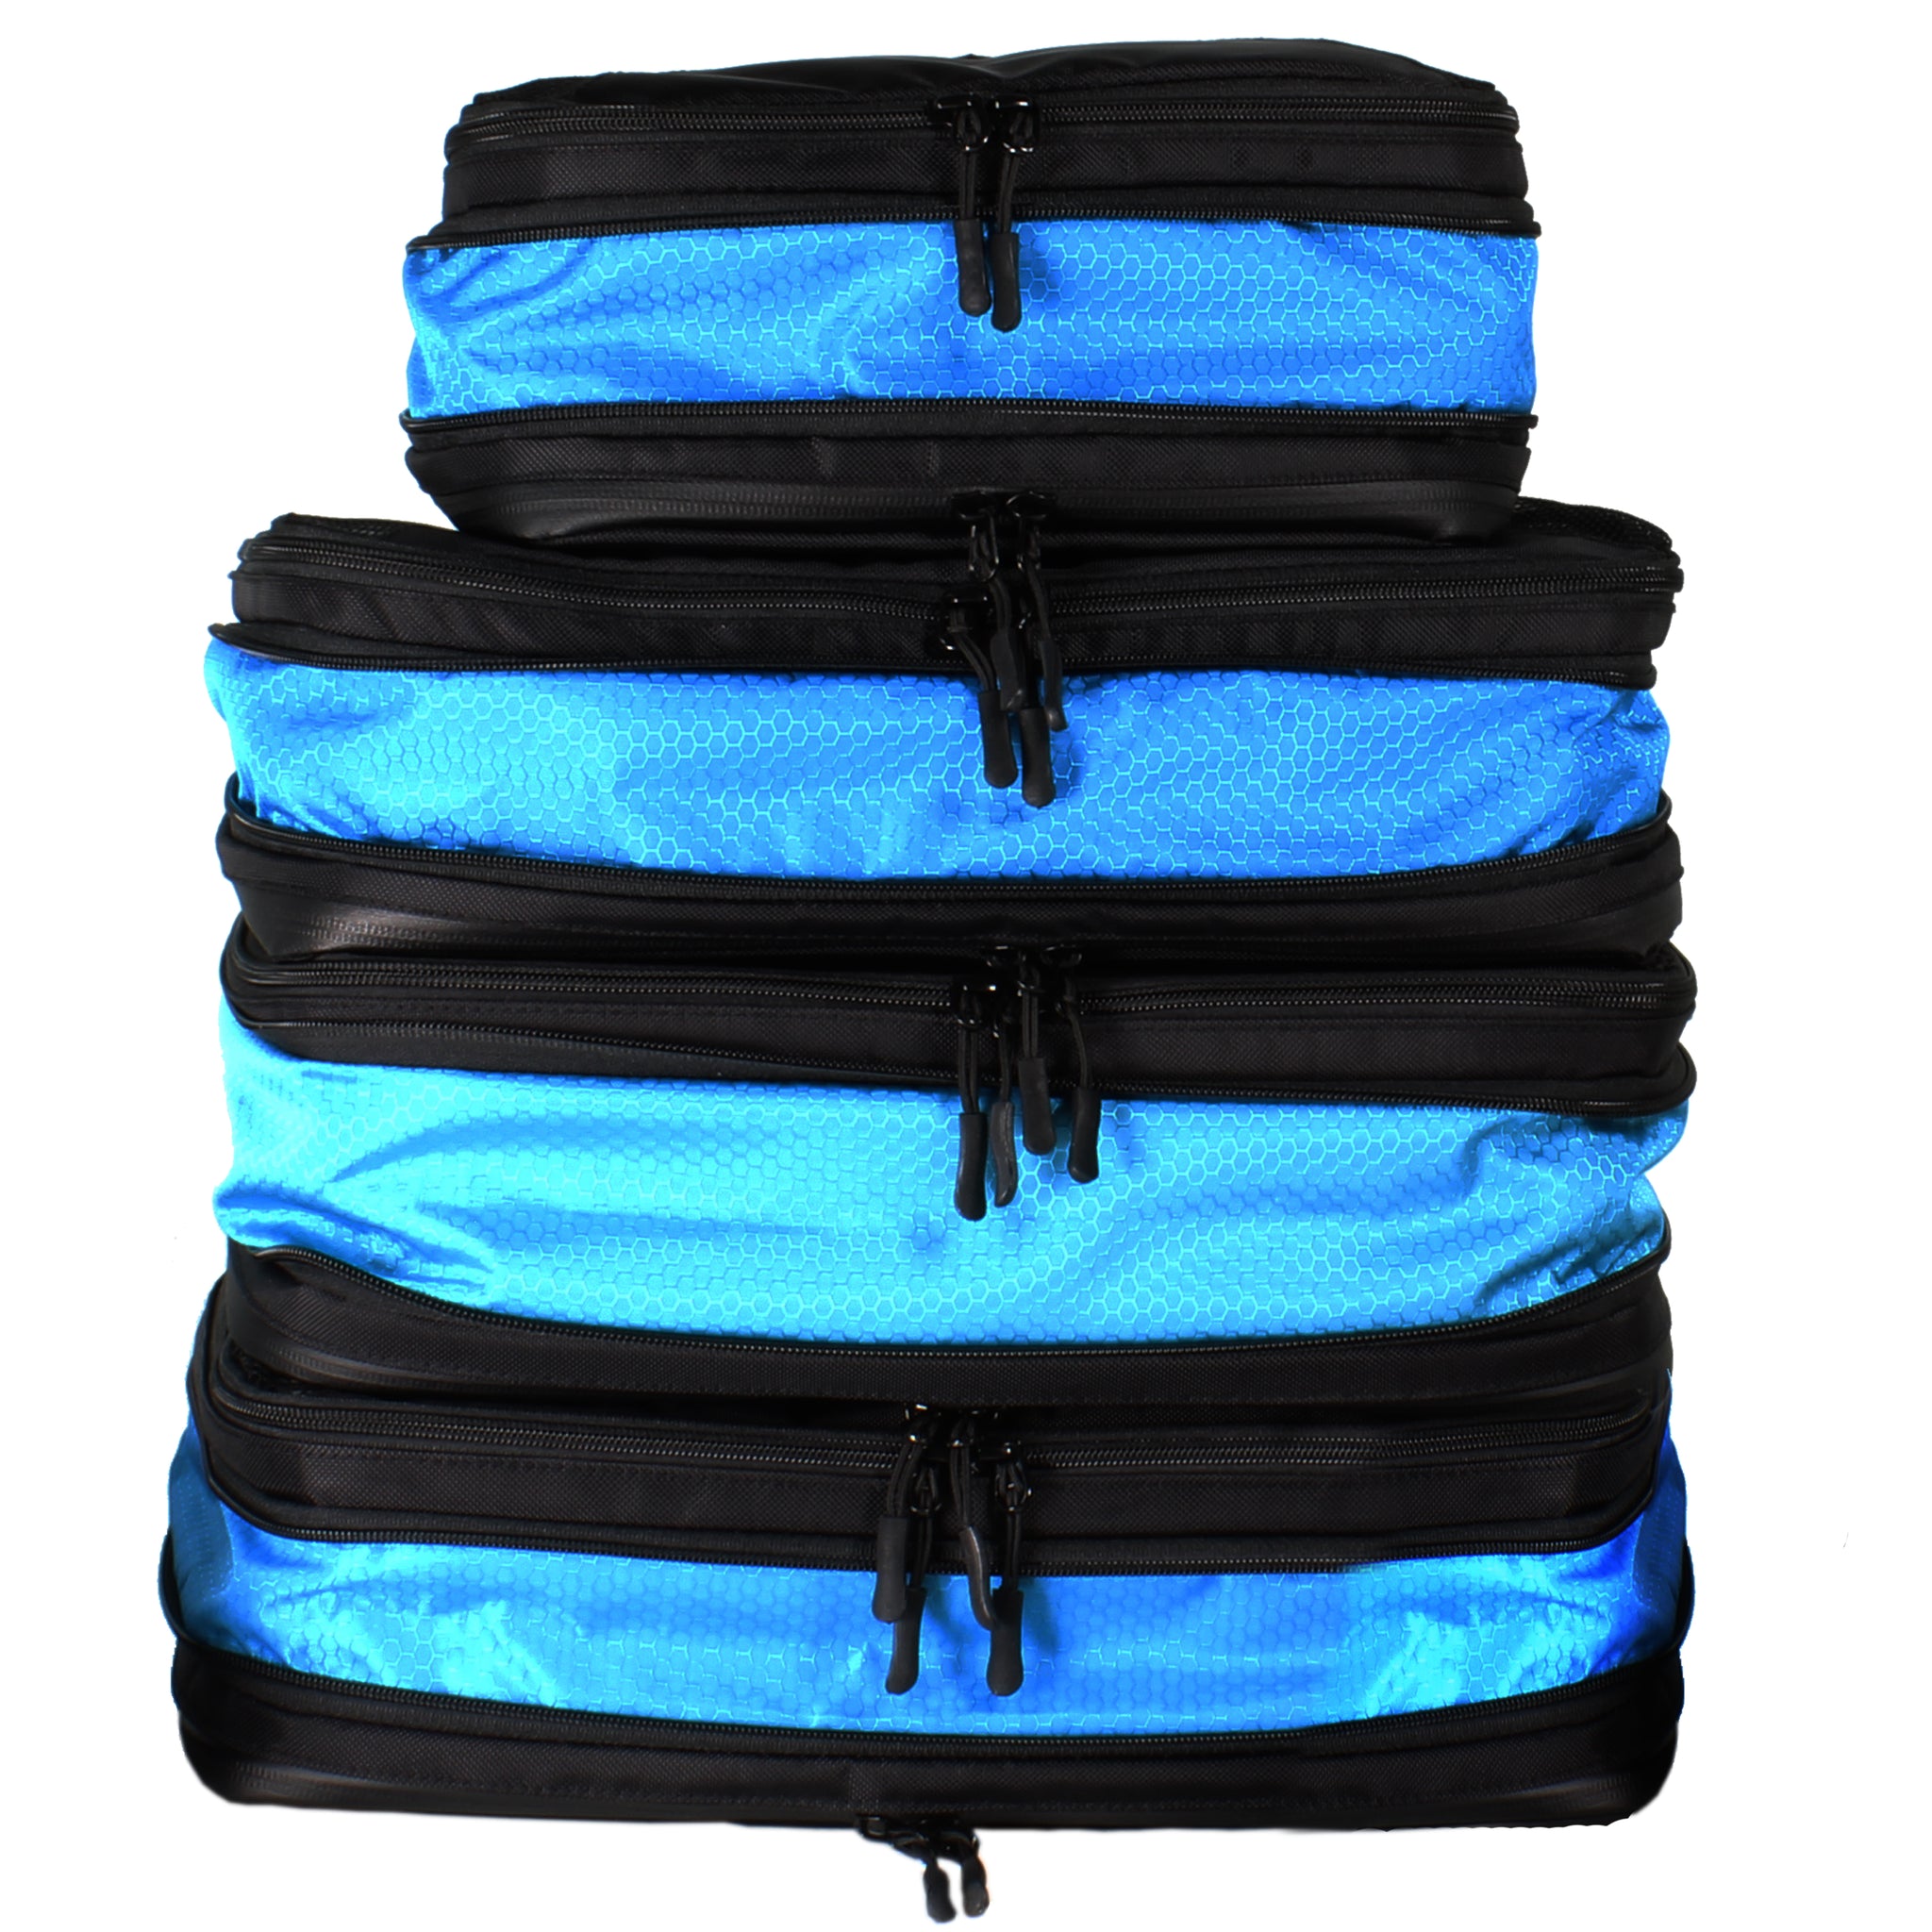 Maximise Suitcase Space with Compression Packing Cubes - Shop Now!